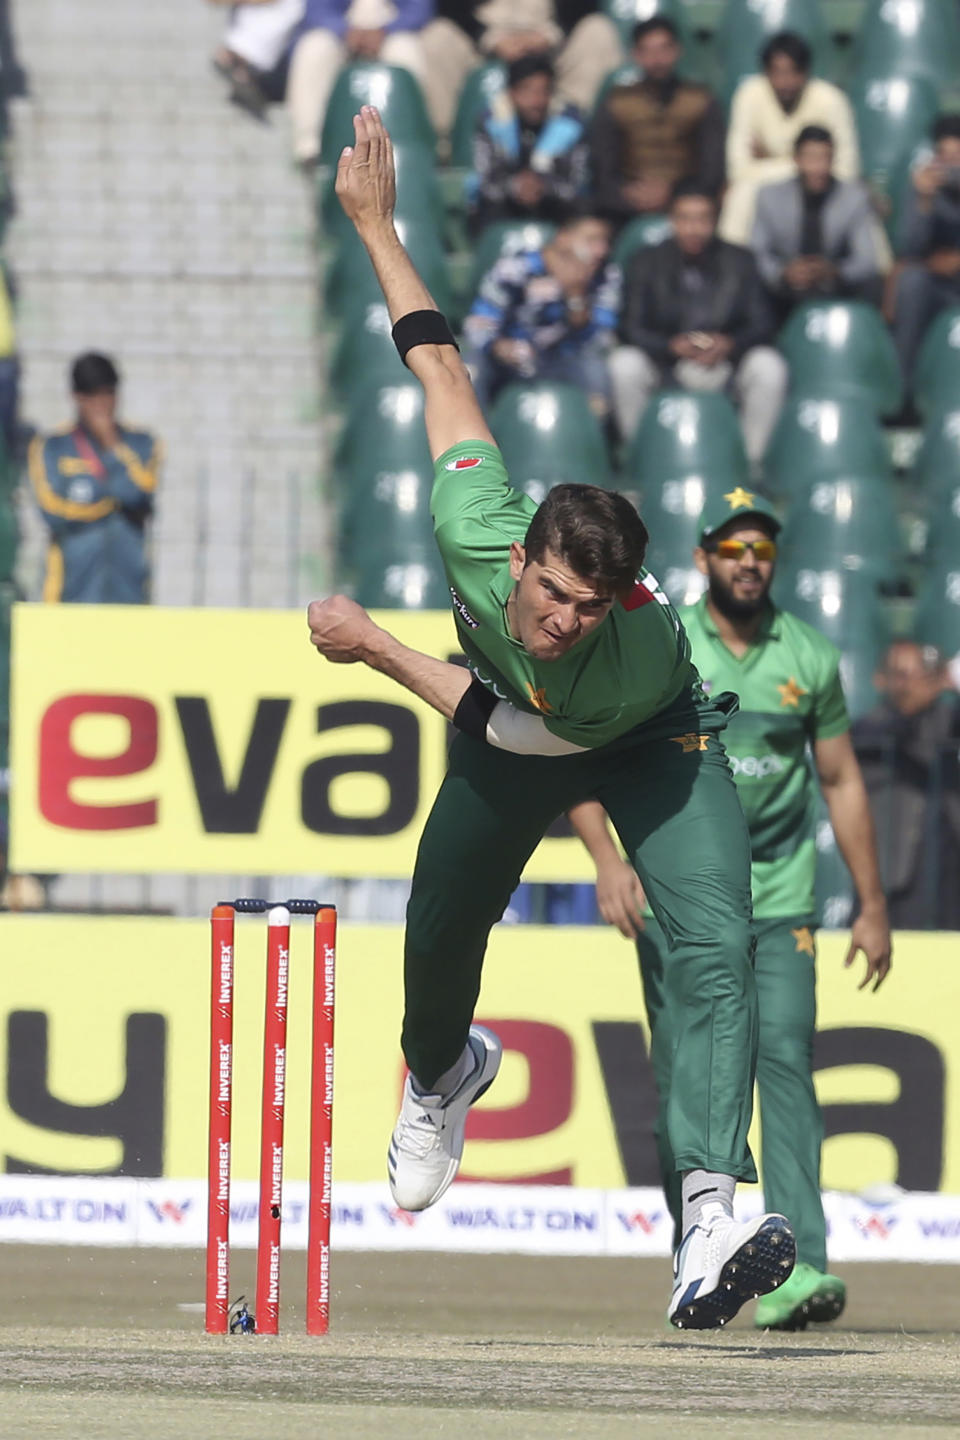 Pakistani bowler Shaheen Afridi bowls against Bangladesh at the Gaddafi Stadium in Lahore, Pakistan, Friday, Jan. 24, 2020. Pakistan and Bangladesh are playing their first T20 of the three matches series under tight security. (AP Photo/K.M. Chaudary)